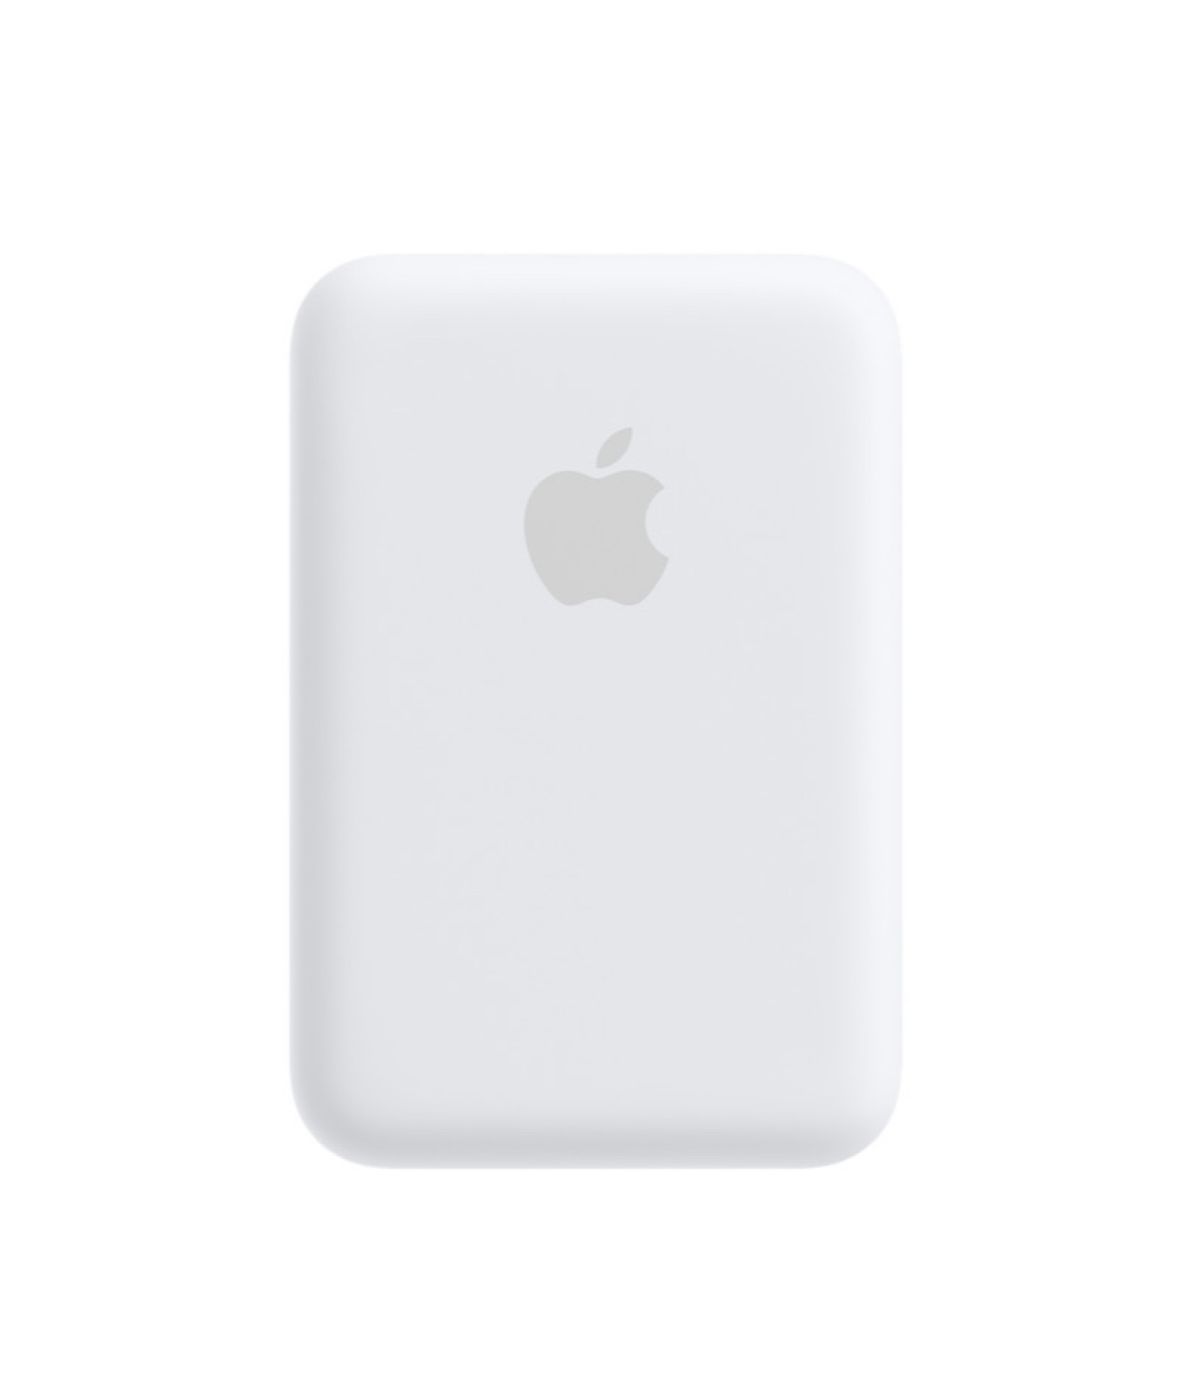 Apple Magsafe battery pack   a2384